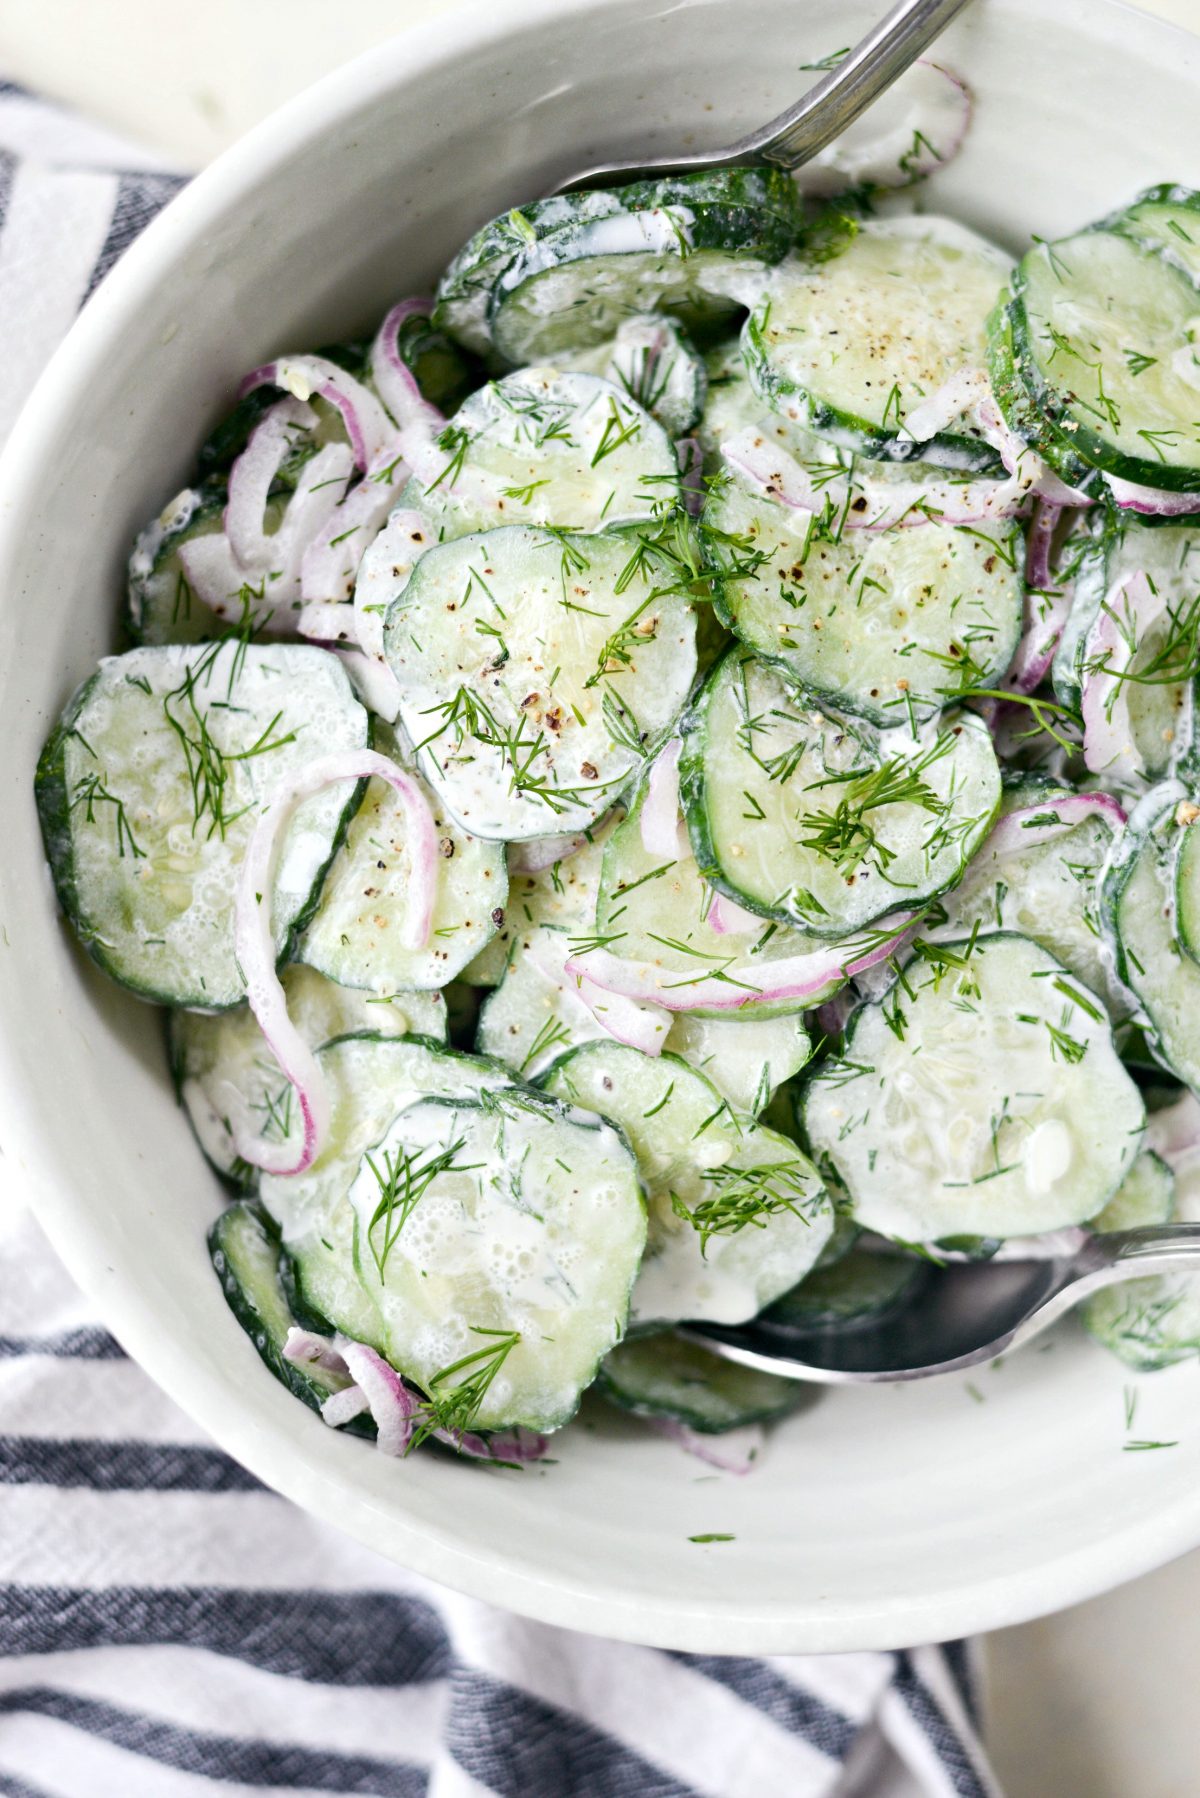 Cucumber Salad with Sour Cream Dill Dressing